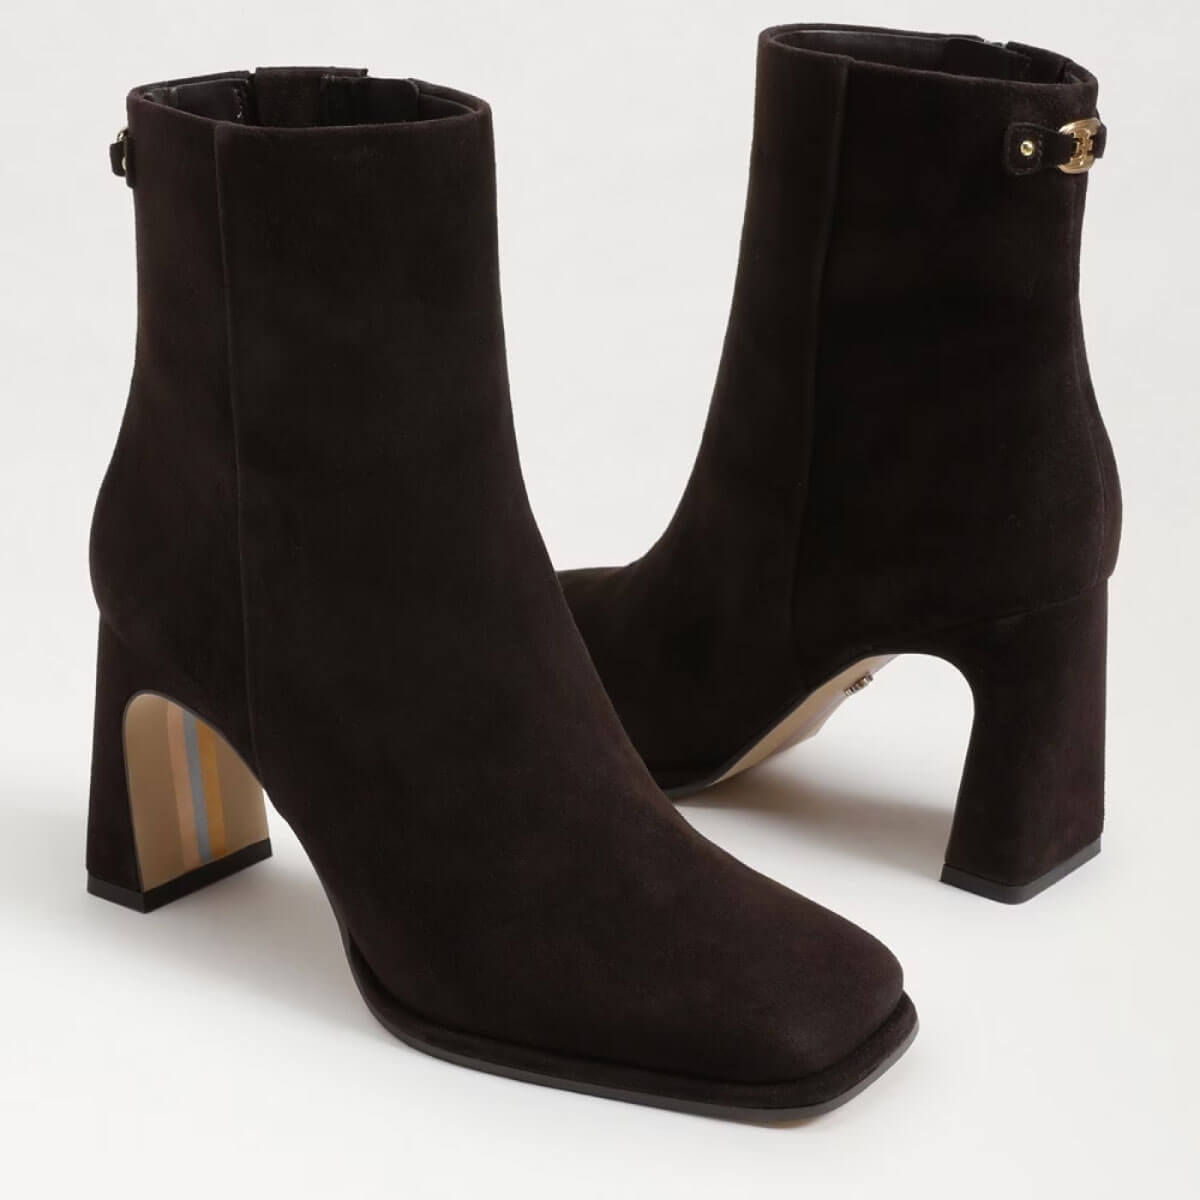 Sam Edelman Irie Square Toe Ankle Bootie chocolate brown  | MILK MONEY milkmoney.co | cute shoes for women. ladies shoes. nice shoes for women. footwear for women. ladies shoes online. ladies footwear. womens shoes and boots. pretty shoes for women. beautiful shoes for women.